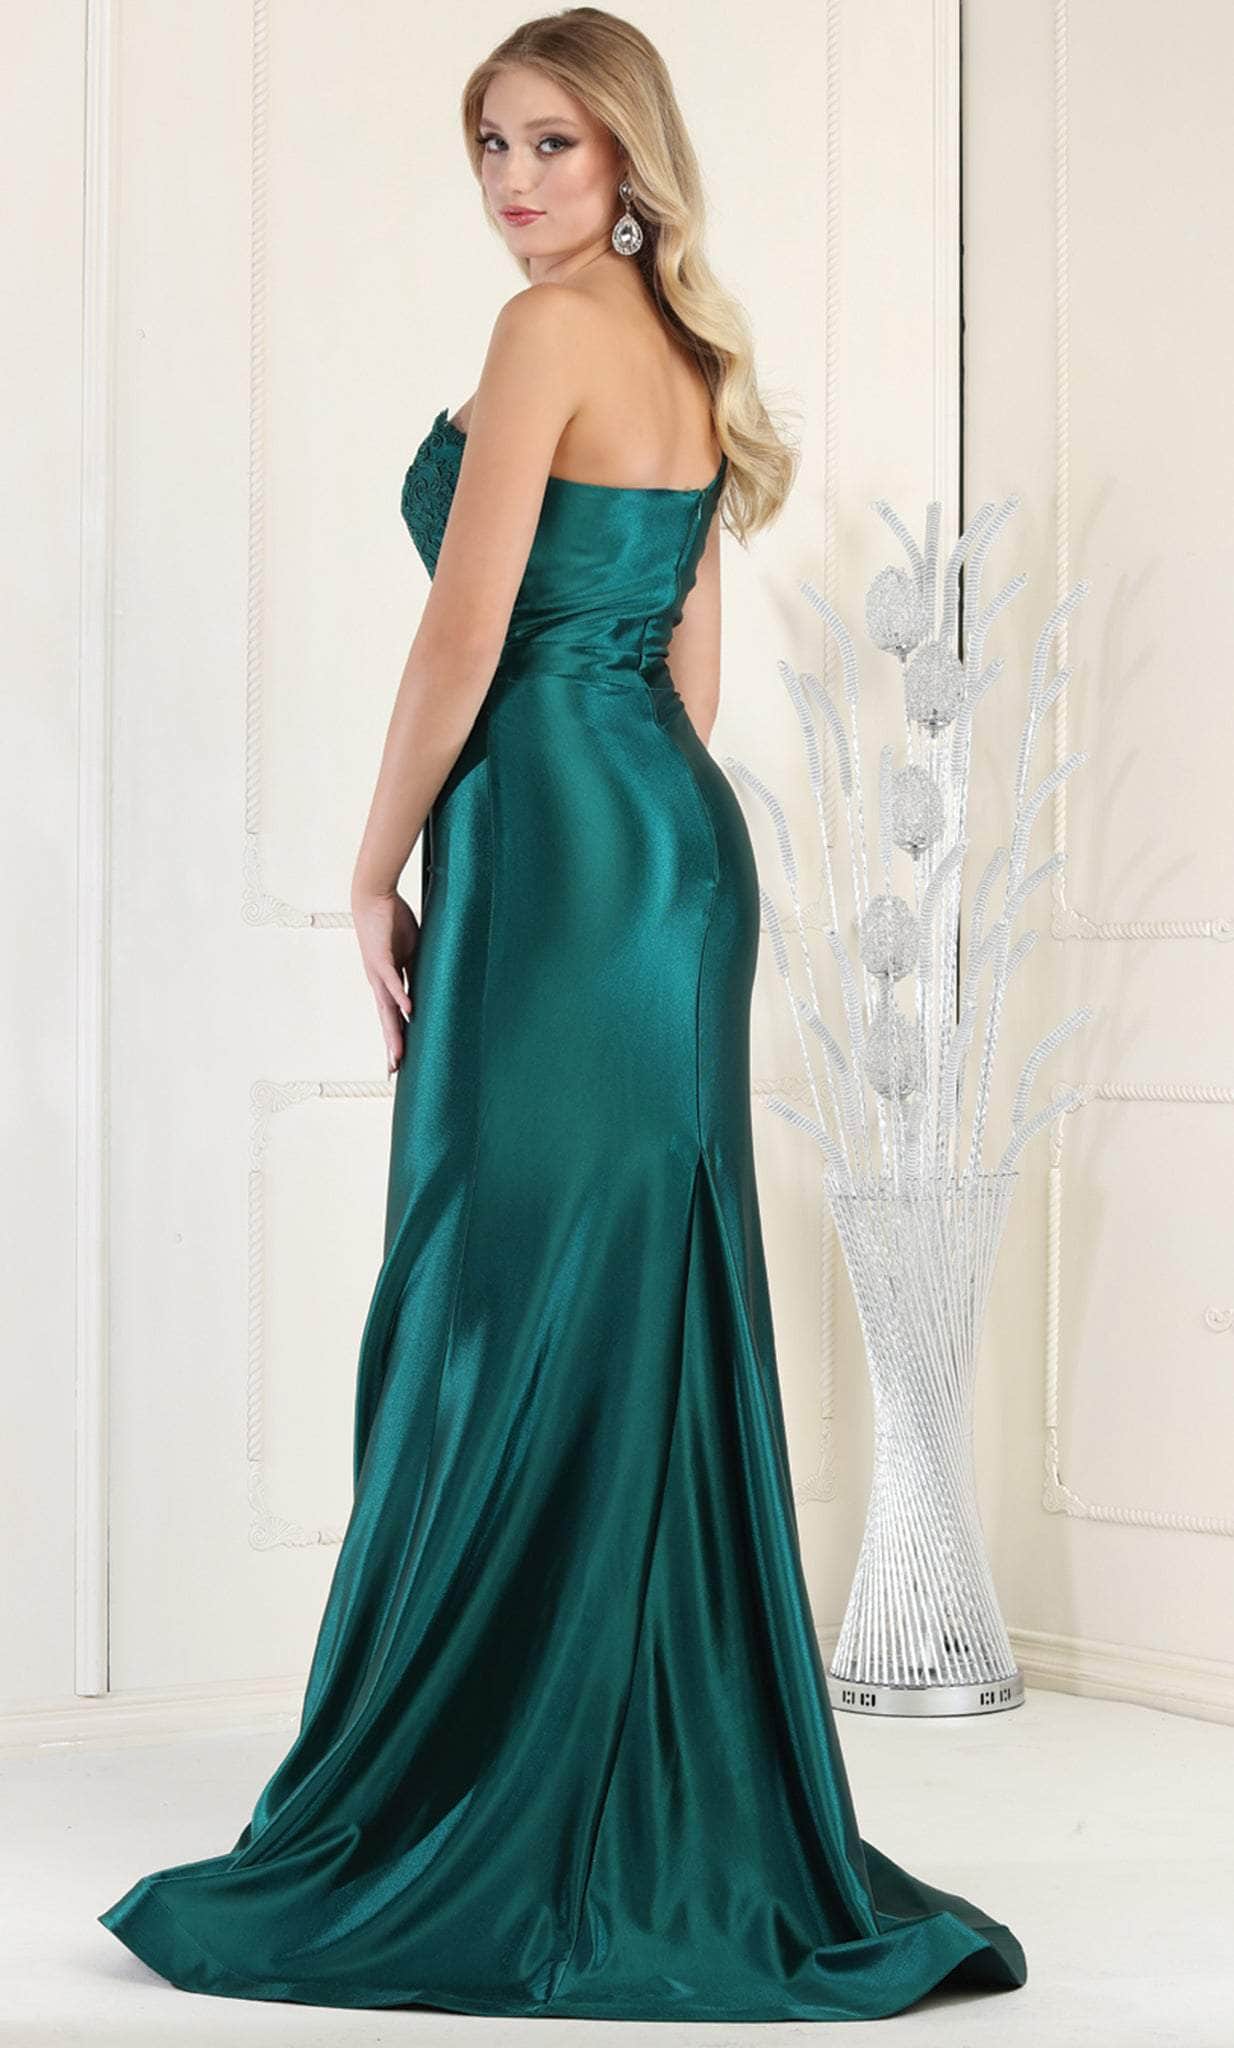 May Queen RQ7962 - Asymmetric Strap Train Gown Evening Dresses